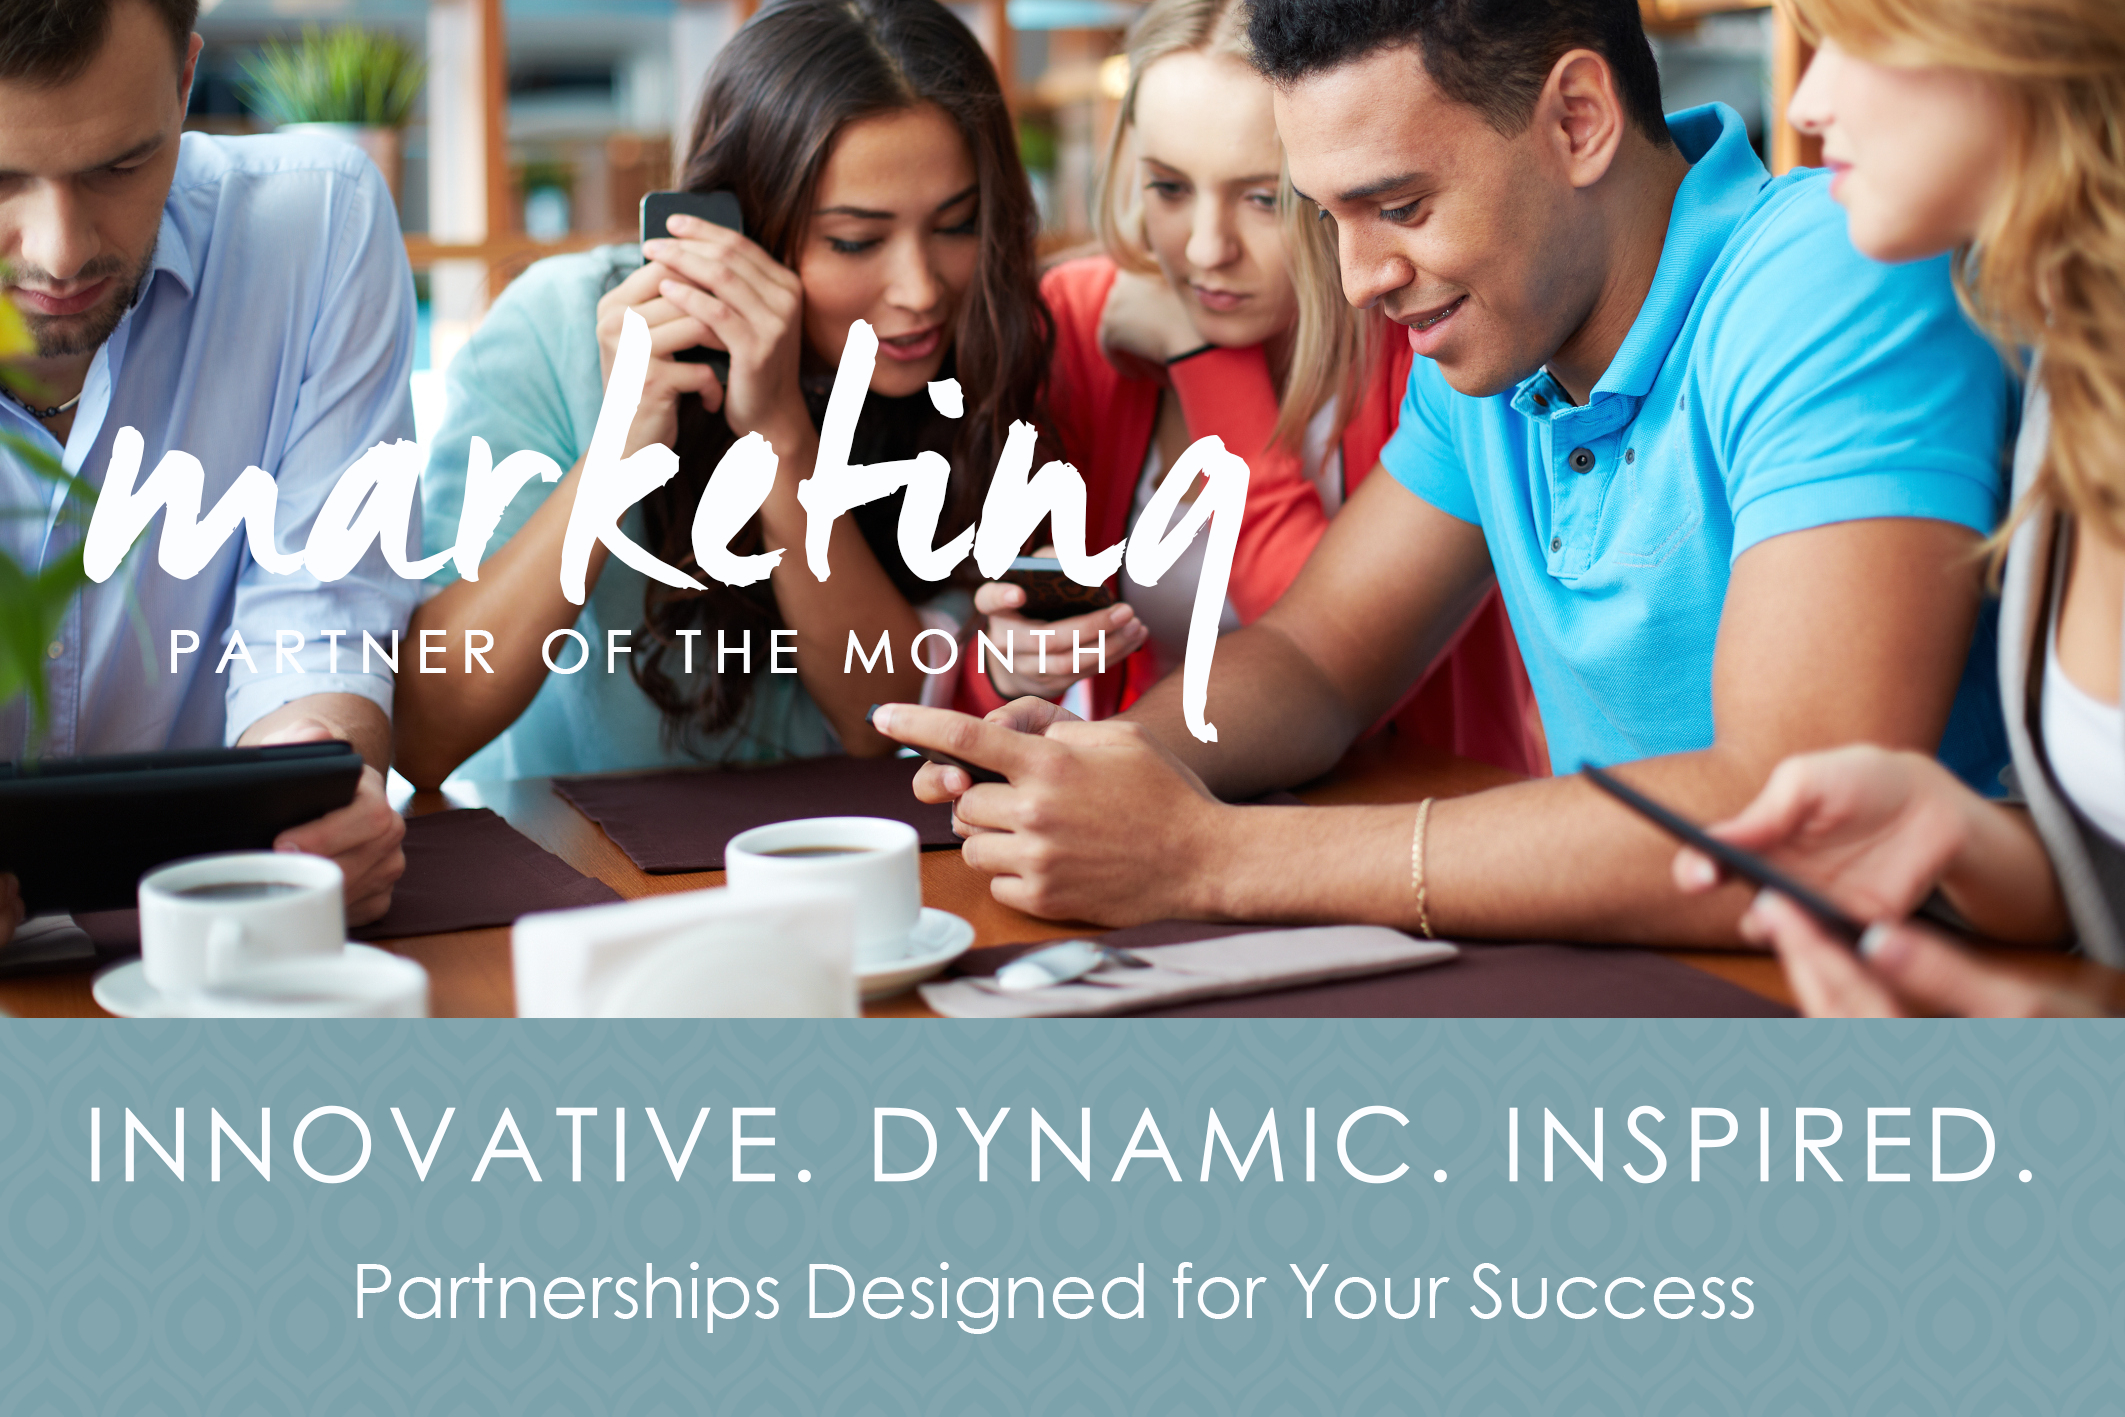 Congratulations to Modern Message, LPC's Marketing Partner of the Month